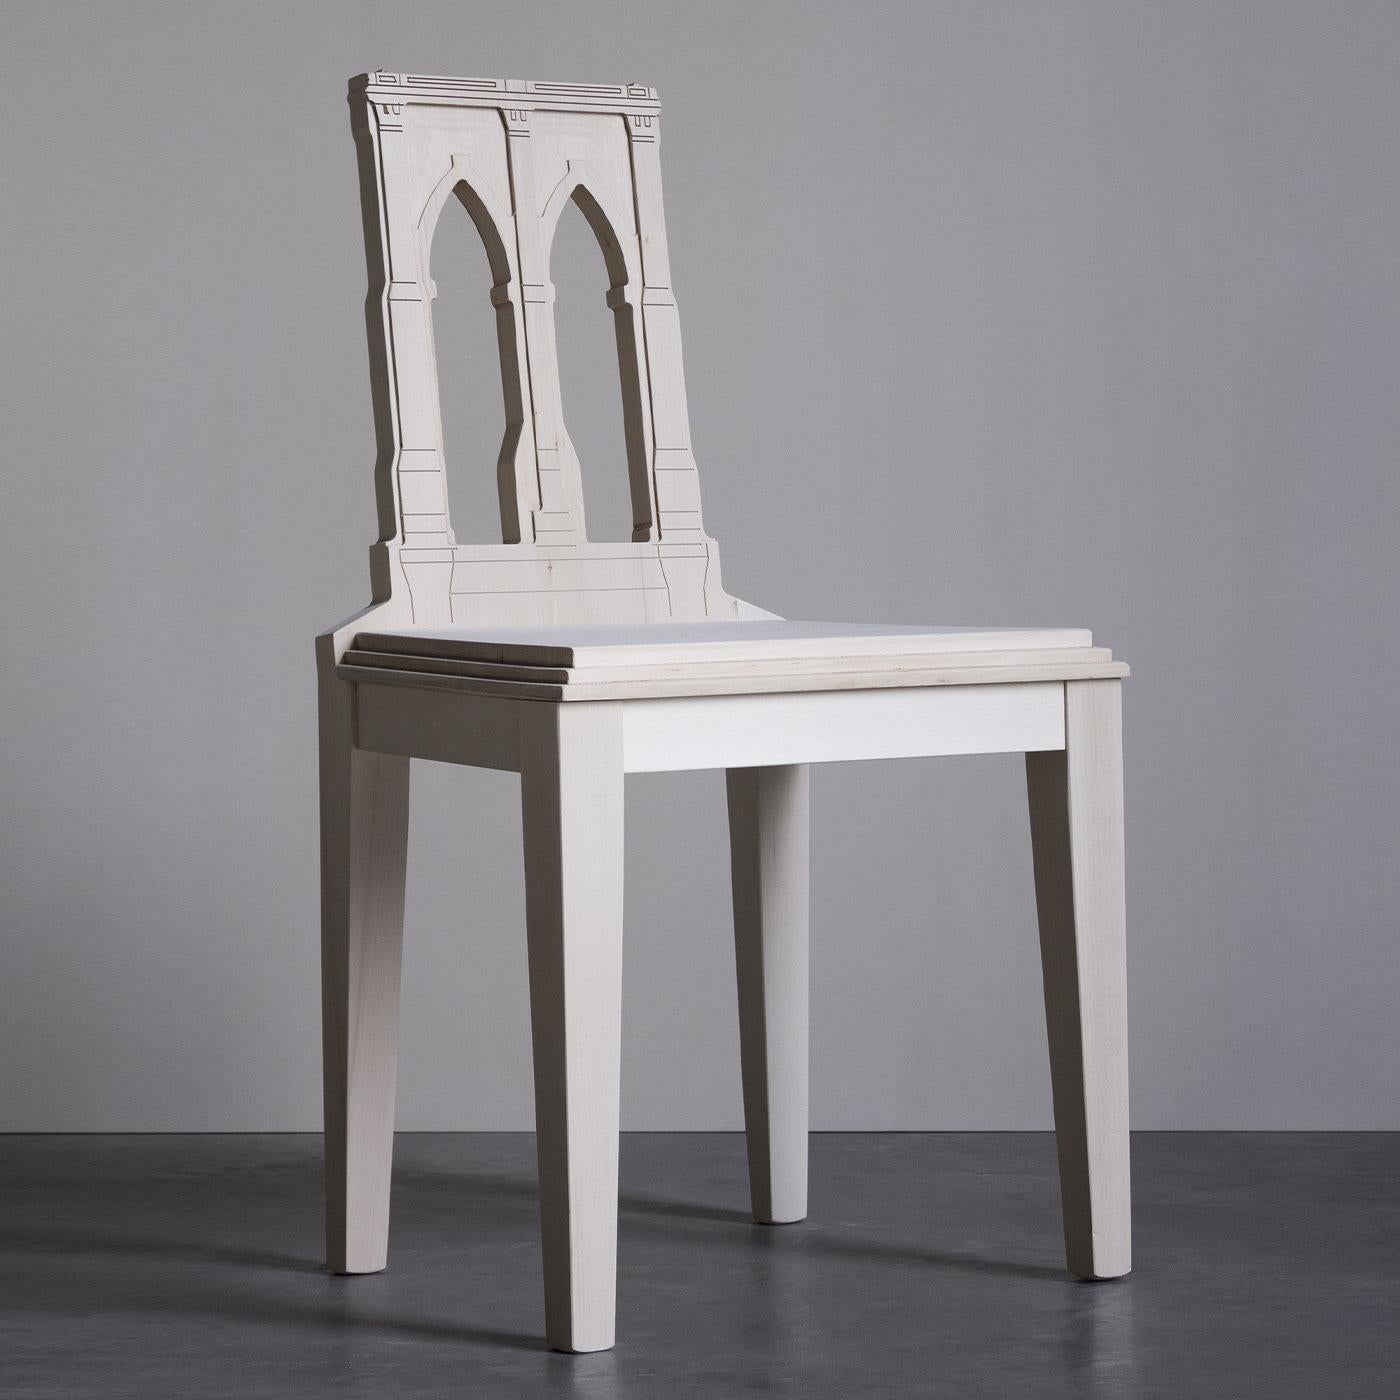 A tribute to the clean and essential lines of the NYC Brooklyn Bridge, this chair is a splendid objet d'art created by young artist and designer Cosimo De Vita. Part of the Cityng Collection produced by Savio Interiors for Chelini Firenze and Savio